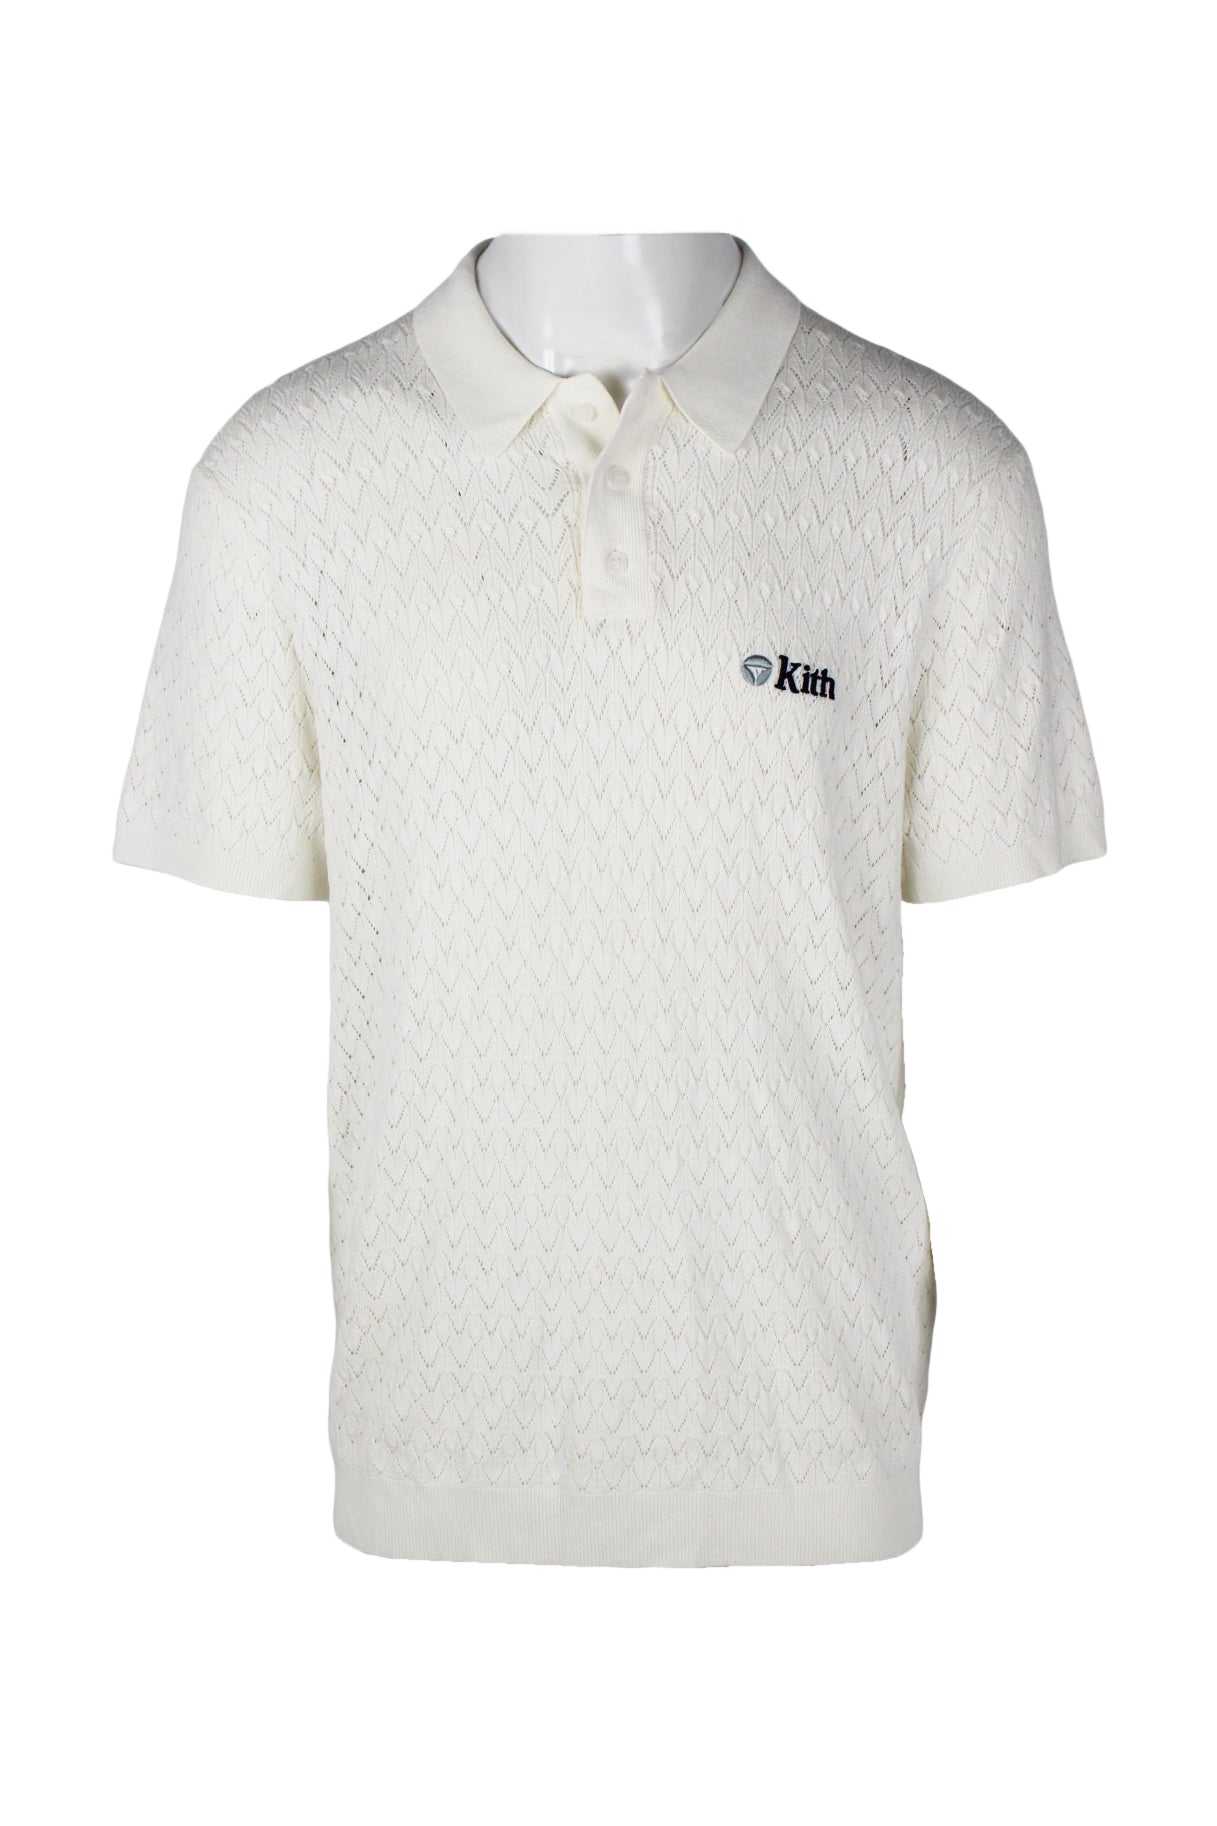 front angle of taylor made with kith cream crocheted polo shirt. features branding over heart in dark blue embroidery with text 'kith', ribbed collar/three button placket/cuffs/hem, and all over semi-sheer crochet pattern throughout. 